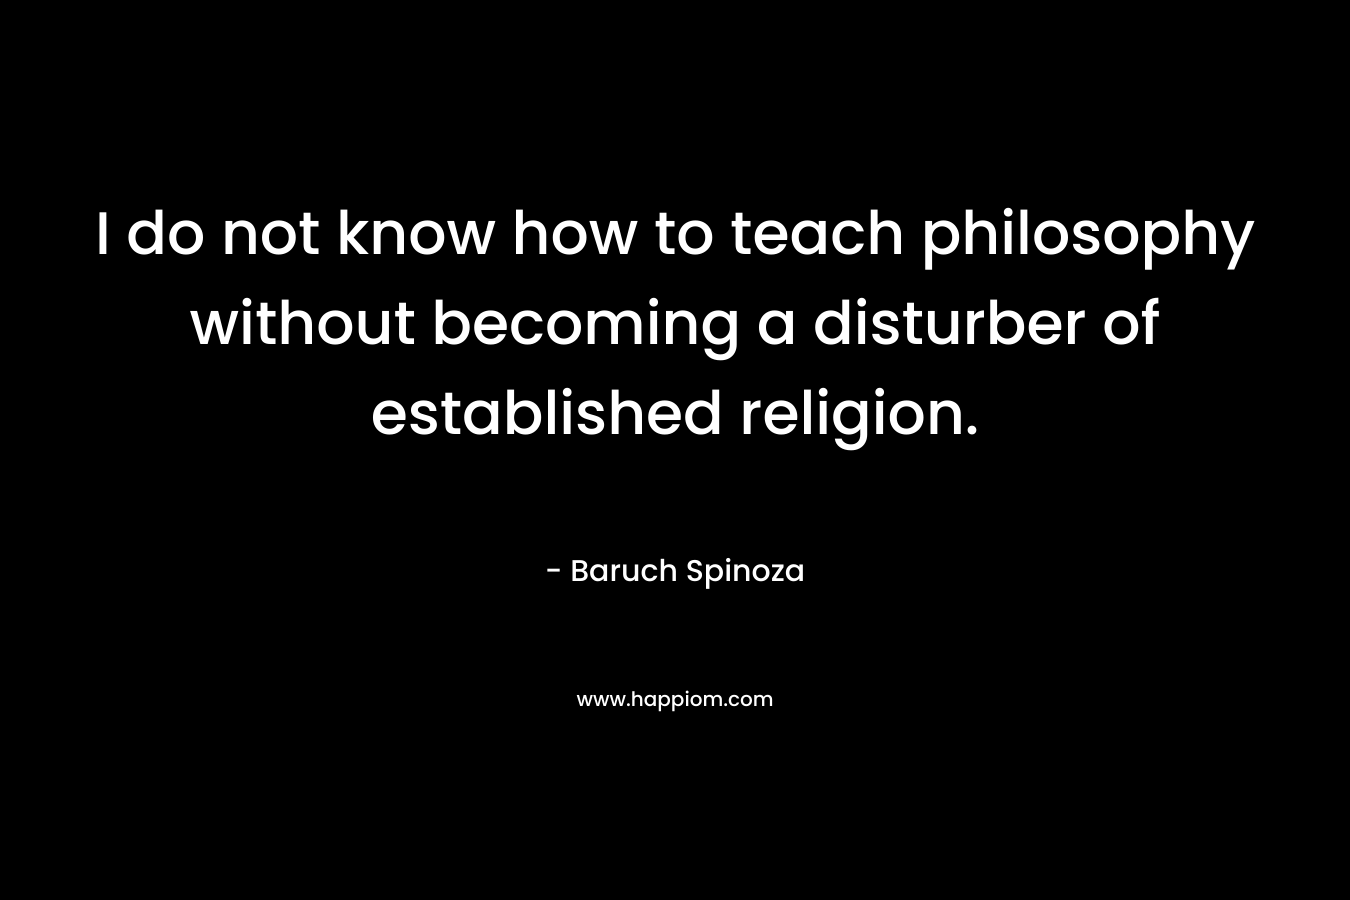 I do not know how to teach philosophy without becoming a disturber of established religion.